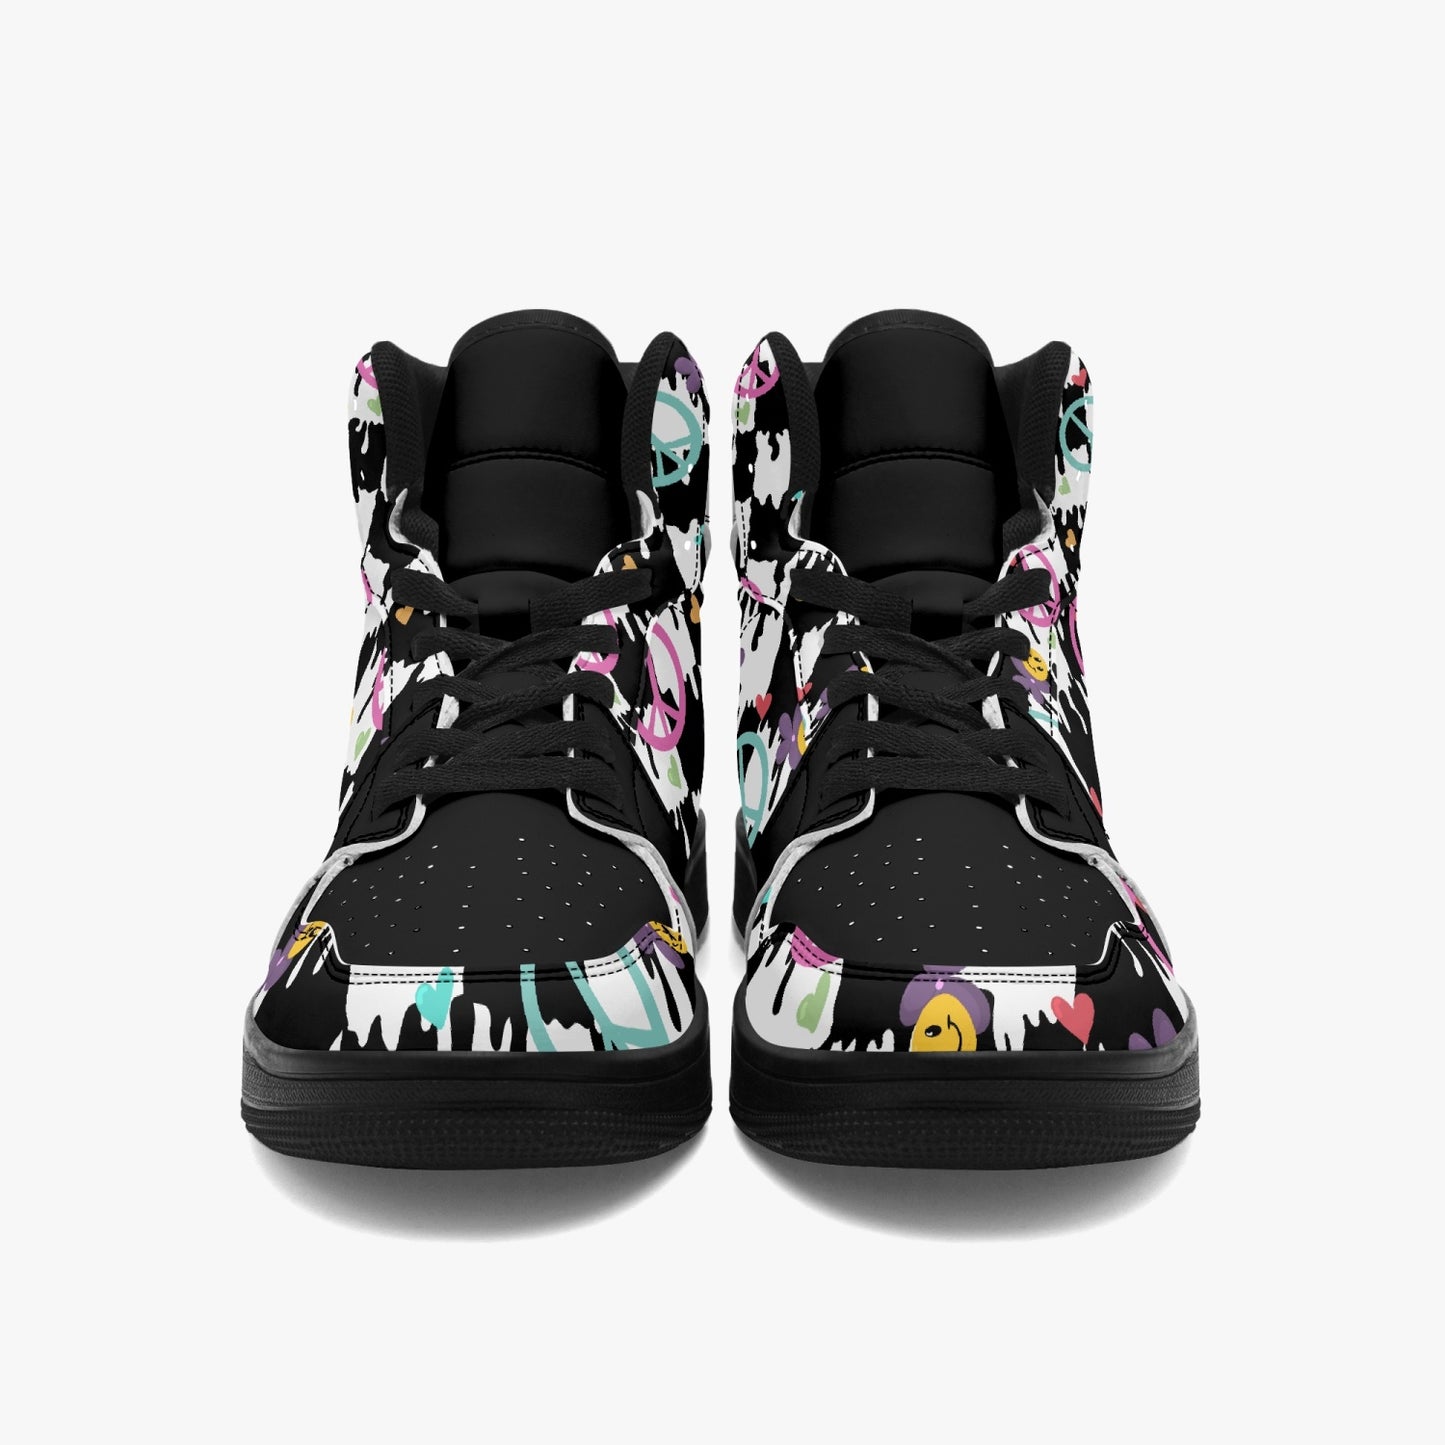 Psychedelic Smiley Sneakers for Adults